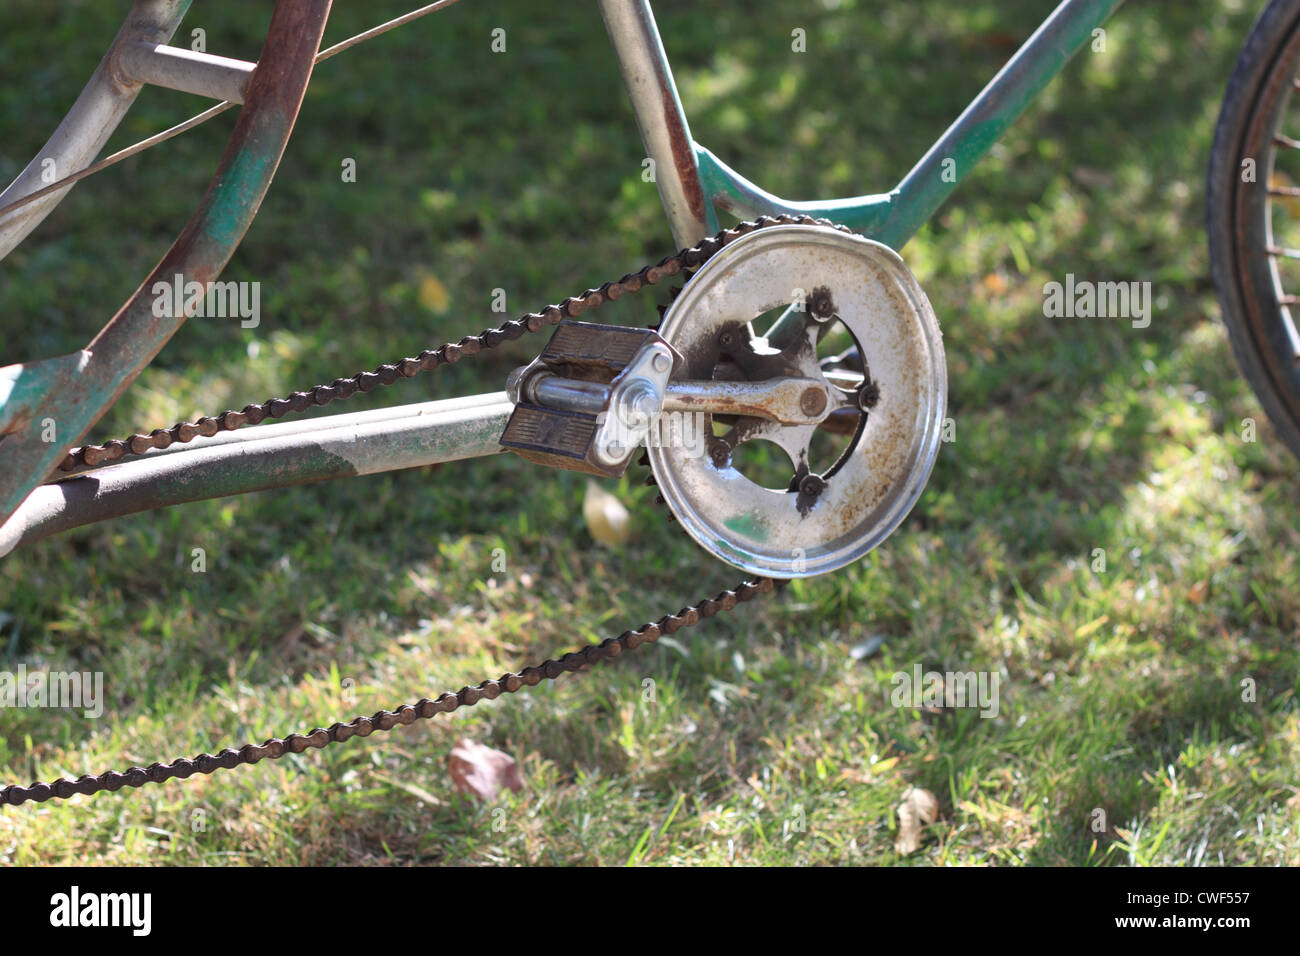 A tricycle on the grassplot. Stock Photo